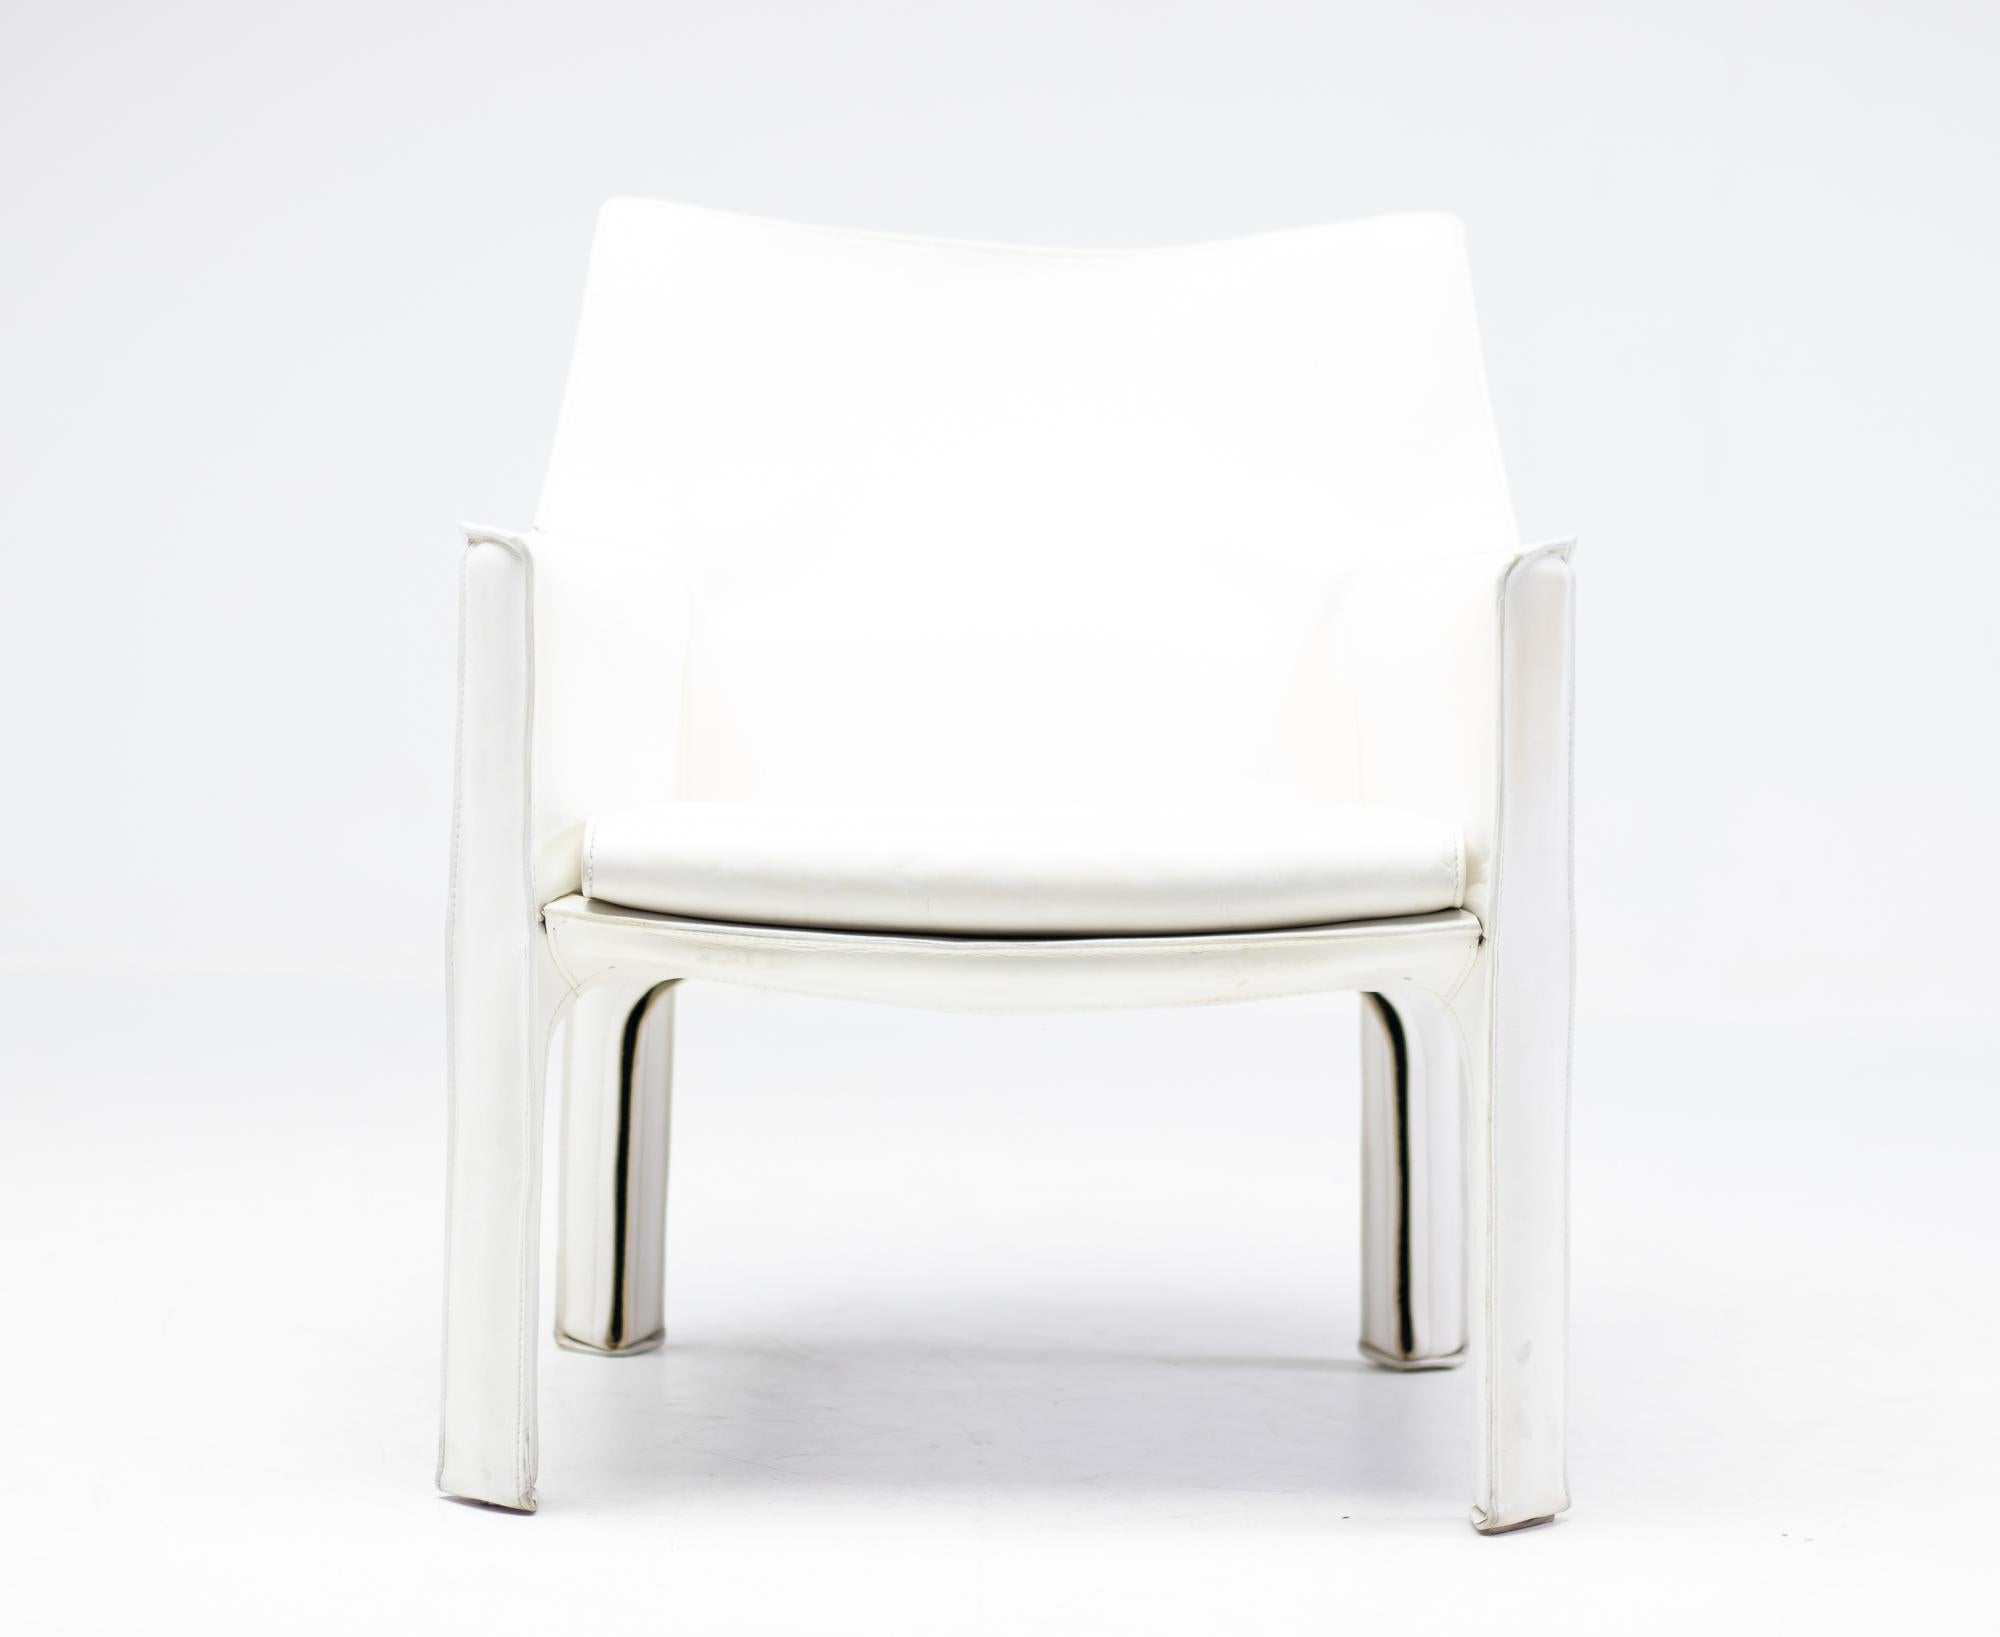 Early Mario Bellini Cab 414 arm chair with white saddle leather upholstery zippered over the steel frame.
Many years of careful use gave them that unmistakable vintage appearance of a pair of used white leather gloves.
Very comfortable chair that